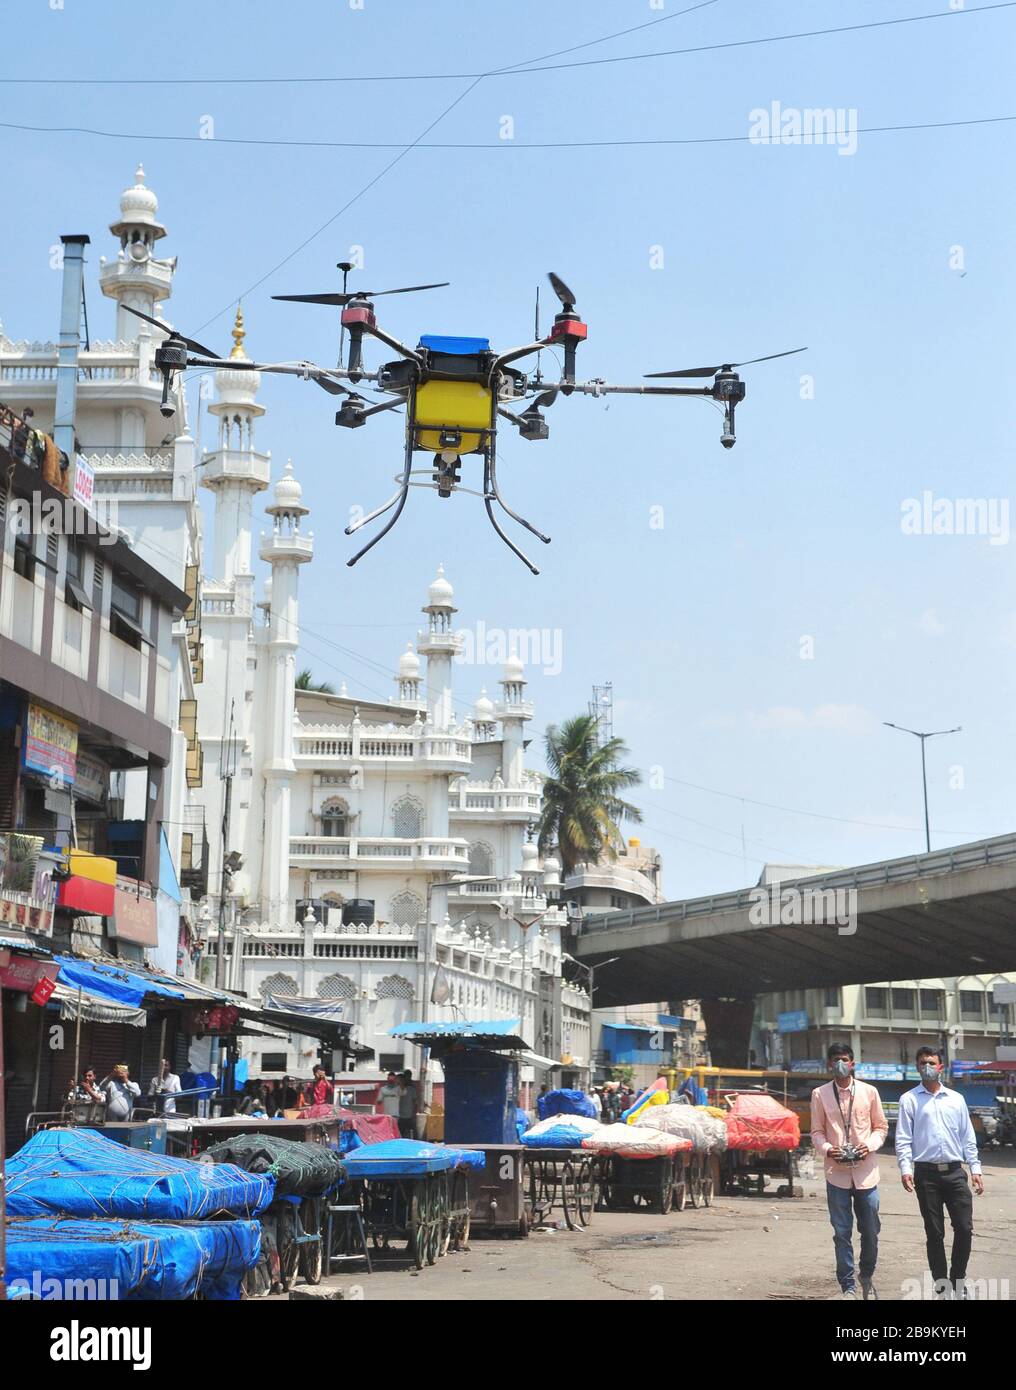 Bangalore, India. 24th Mar, 2020. Indian private company workers fly a drone to spray disinfectant in Bangalore, India, March 24, 2020. The number of confirmed COVID-19 cases in India has reached 519, India's federal health ministry said Tuesday evening. Credit: Str/Xinhua/Alamy Live News Stock Photo